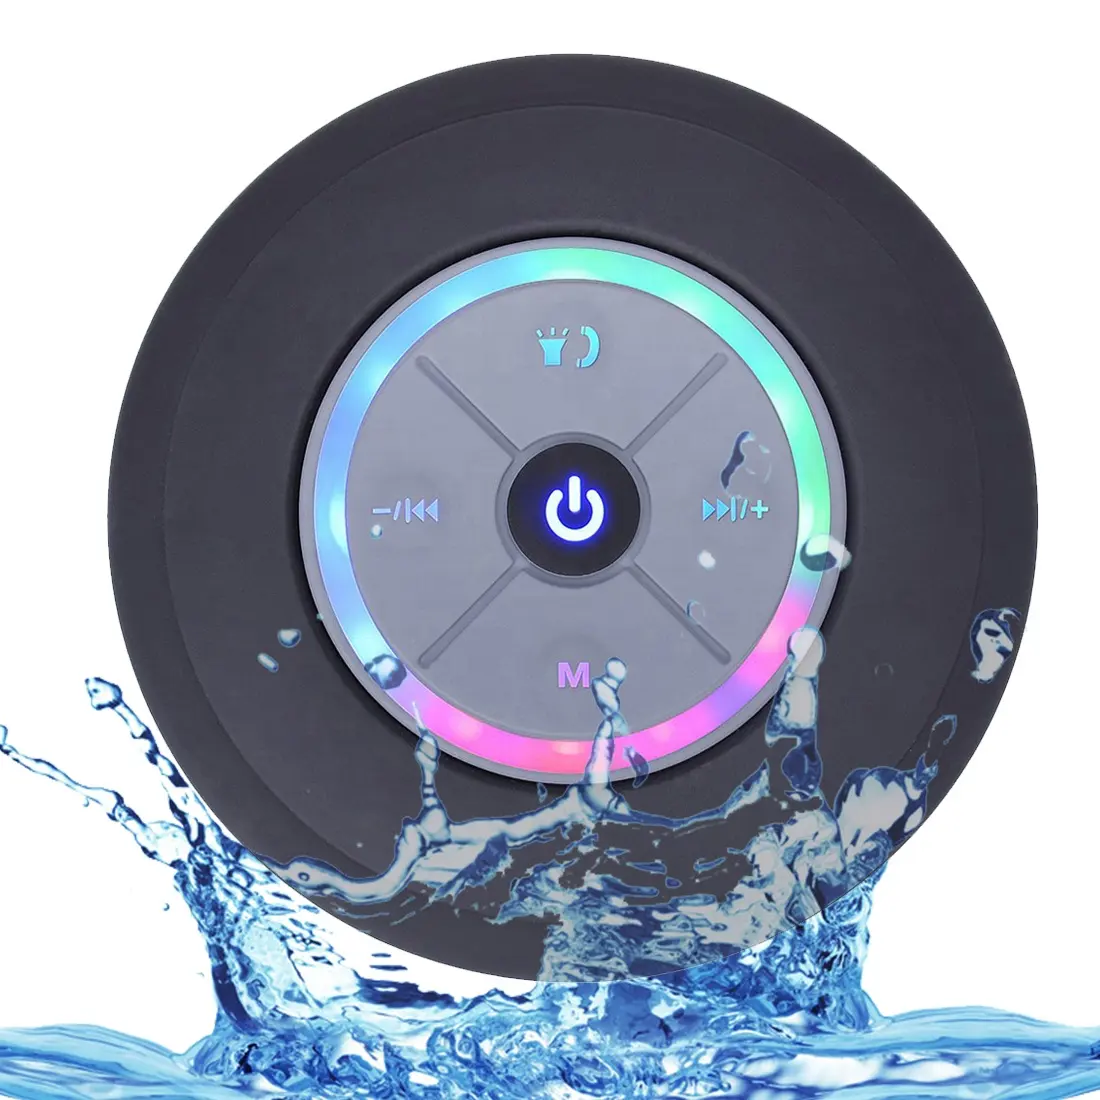 China manufacturer Q9 Portable Outdoor LED Subwoofer Shower Music Sound Box Wireless Waterproof BT mobile Speaker With TF/FM/AUX